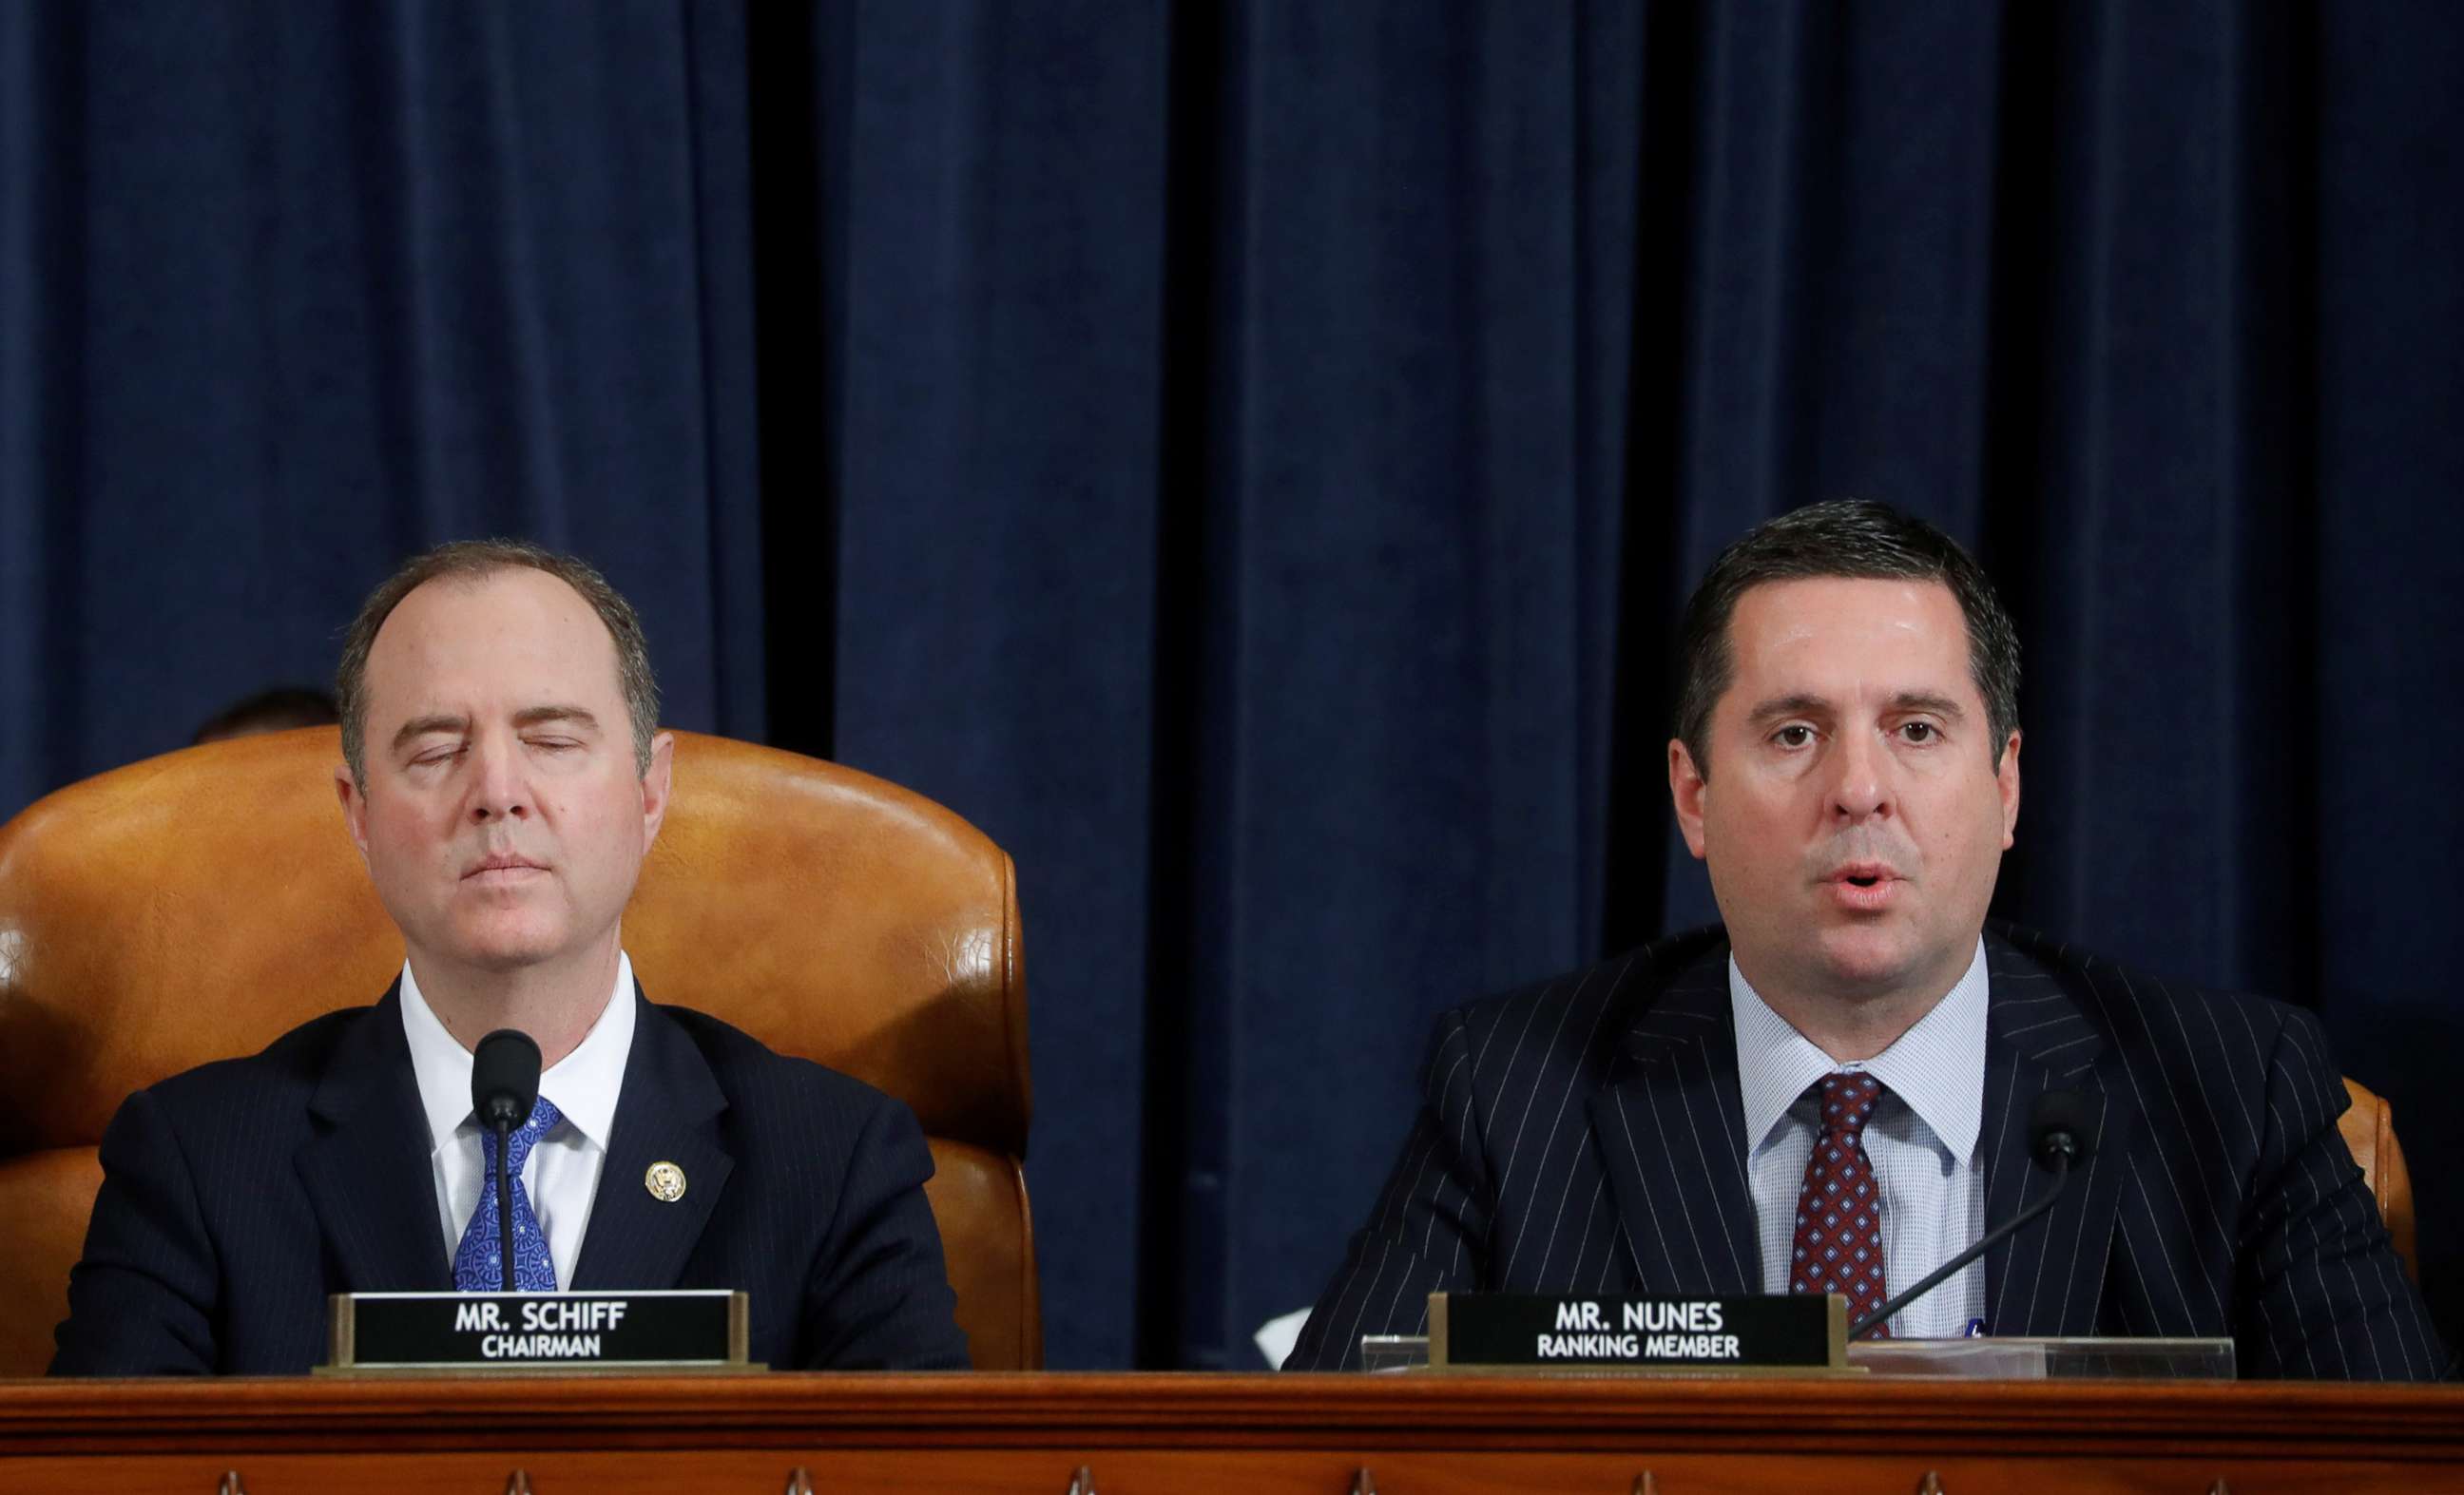 PHOTO: House Intelligence Committee Chairman Rep. Adam Schiff listens as ranking member Rep. Devin Nunes speaks at an impeachment hearing featuring the testimony of Gordon Sondland, U.S. Ambassador to the European Union, Nov. 20, 2019, on Capitol Hill.